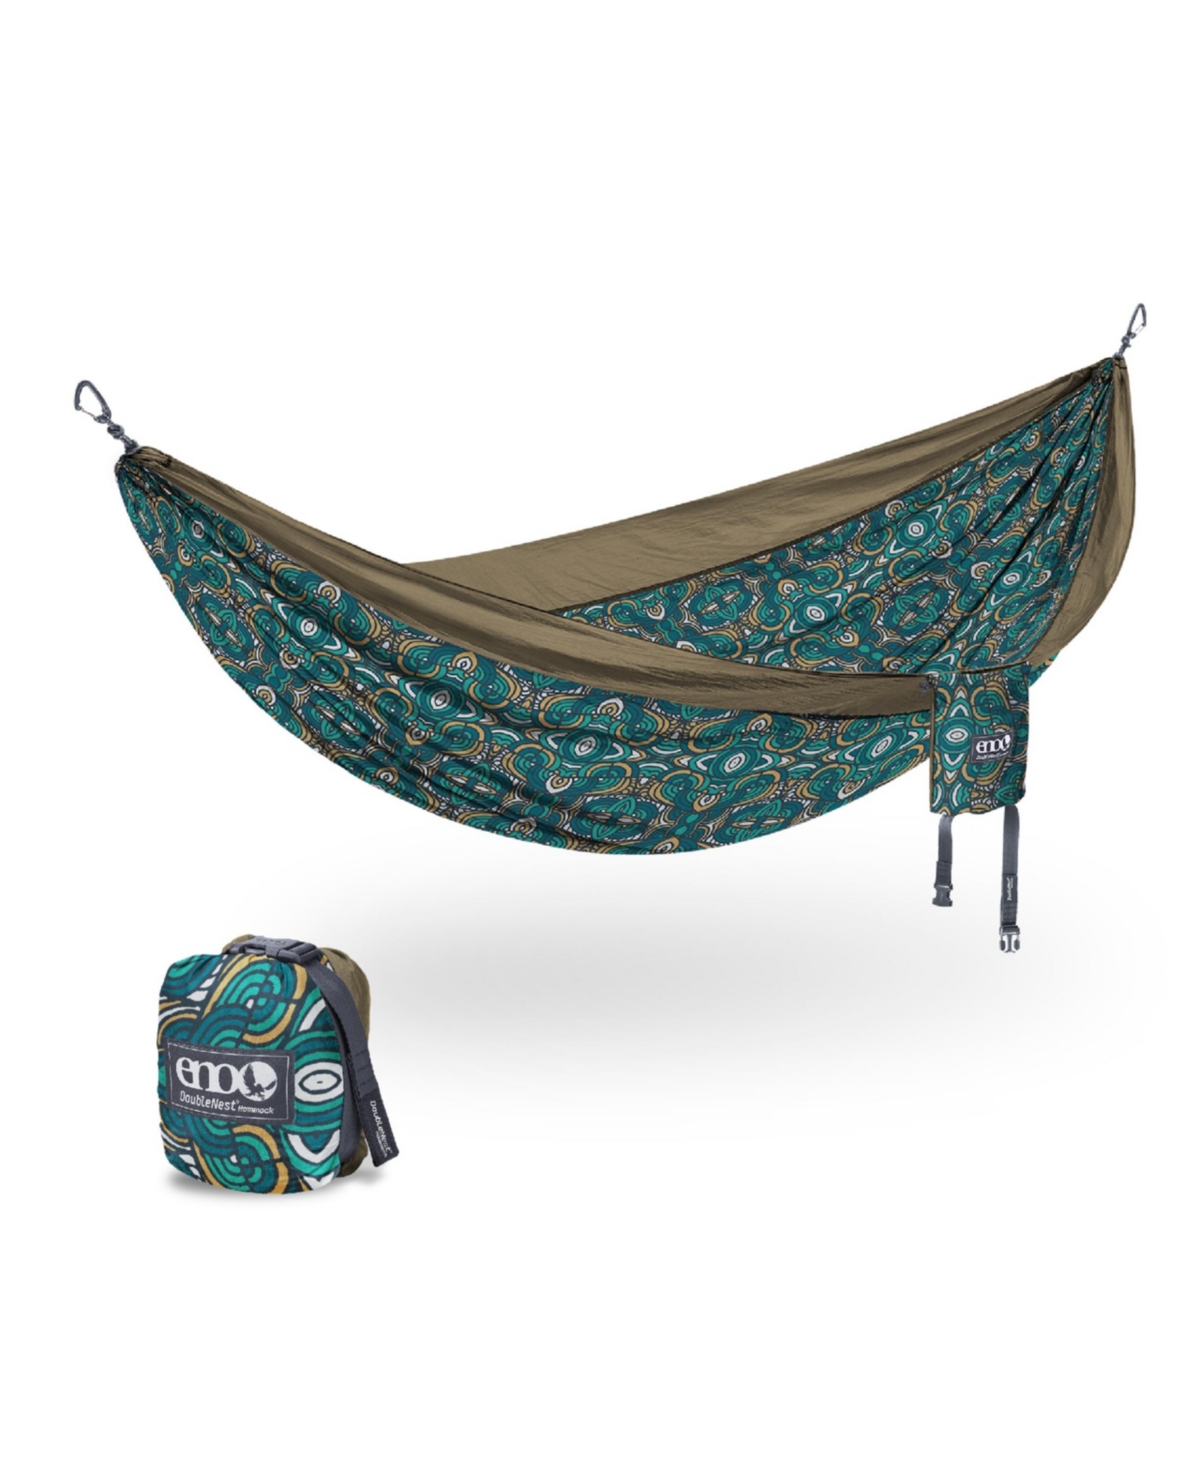 DoubleNest Hammock - Lightweight, Portable, 1 to 2 Person Hammock - For Camping, Hiking, Backpacking, Travel, a Festival, or the Beach - Roots Stu